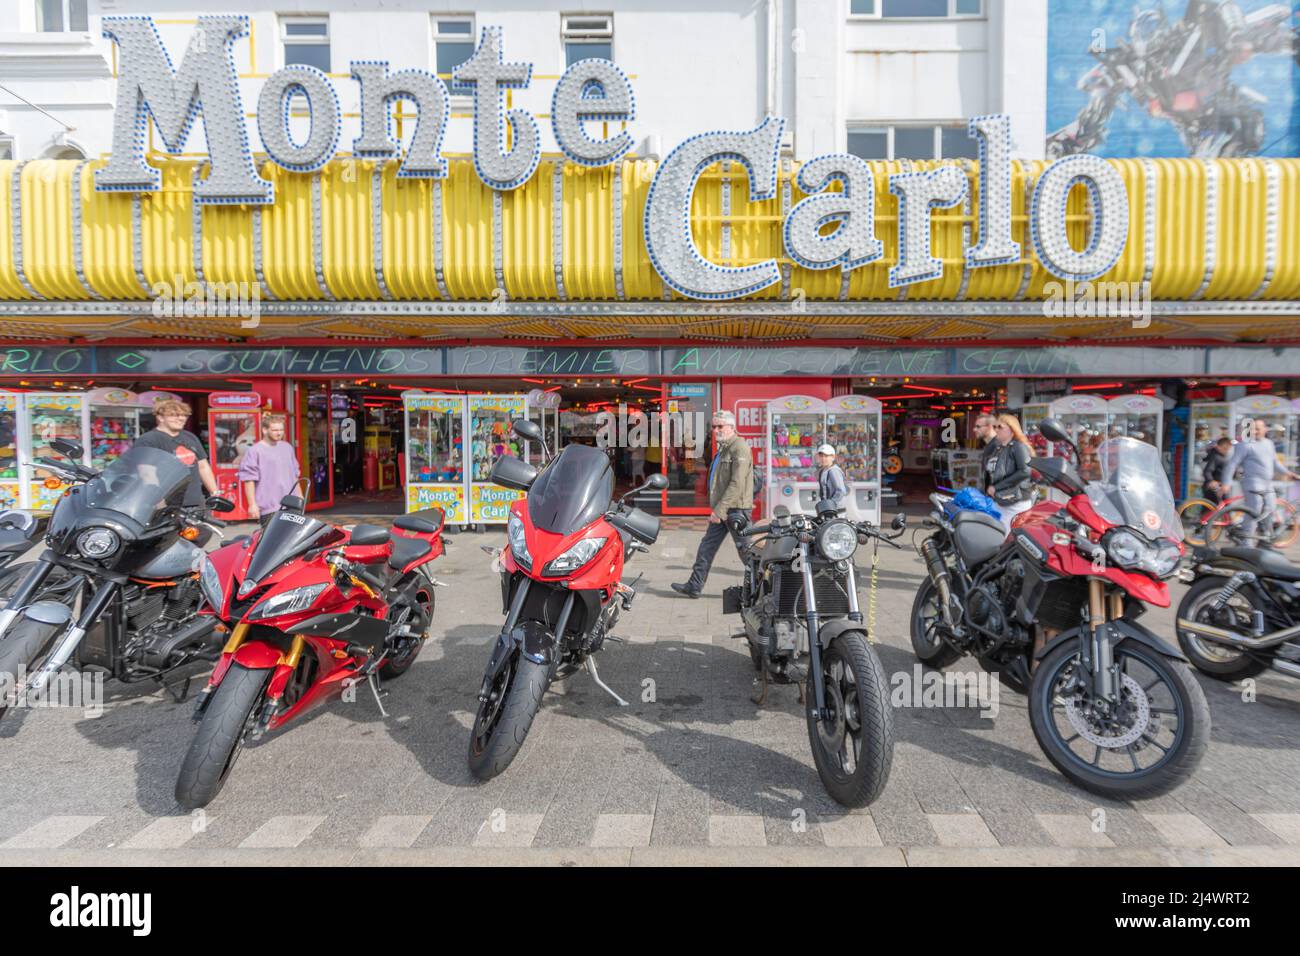 Southend on Sea, UK. 18th Apr, 2022. Motorbikes outside the Monte Carlo amusement arcade. Thousands of motor bikers head into Southend for the annual Easter Monday Shakedown motorbike rally. This is the first time the event has taken place since 2019 due to Covid-19 restrictions. Penelope Barritt/Alamy Live News Stock Photo